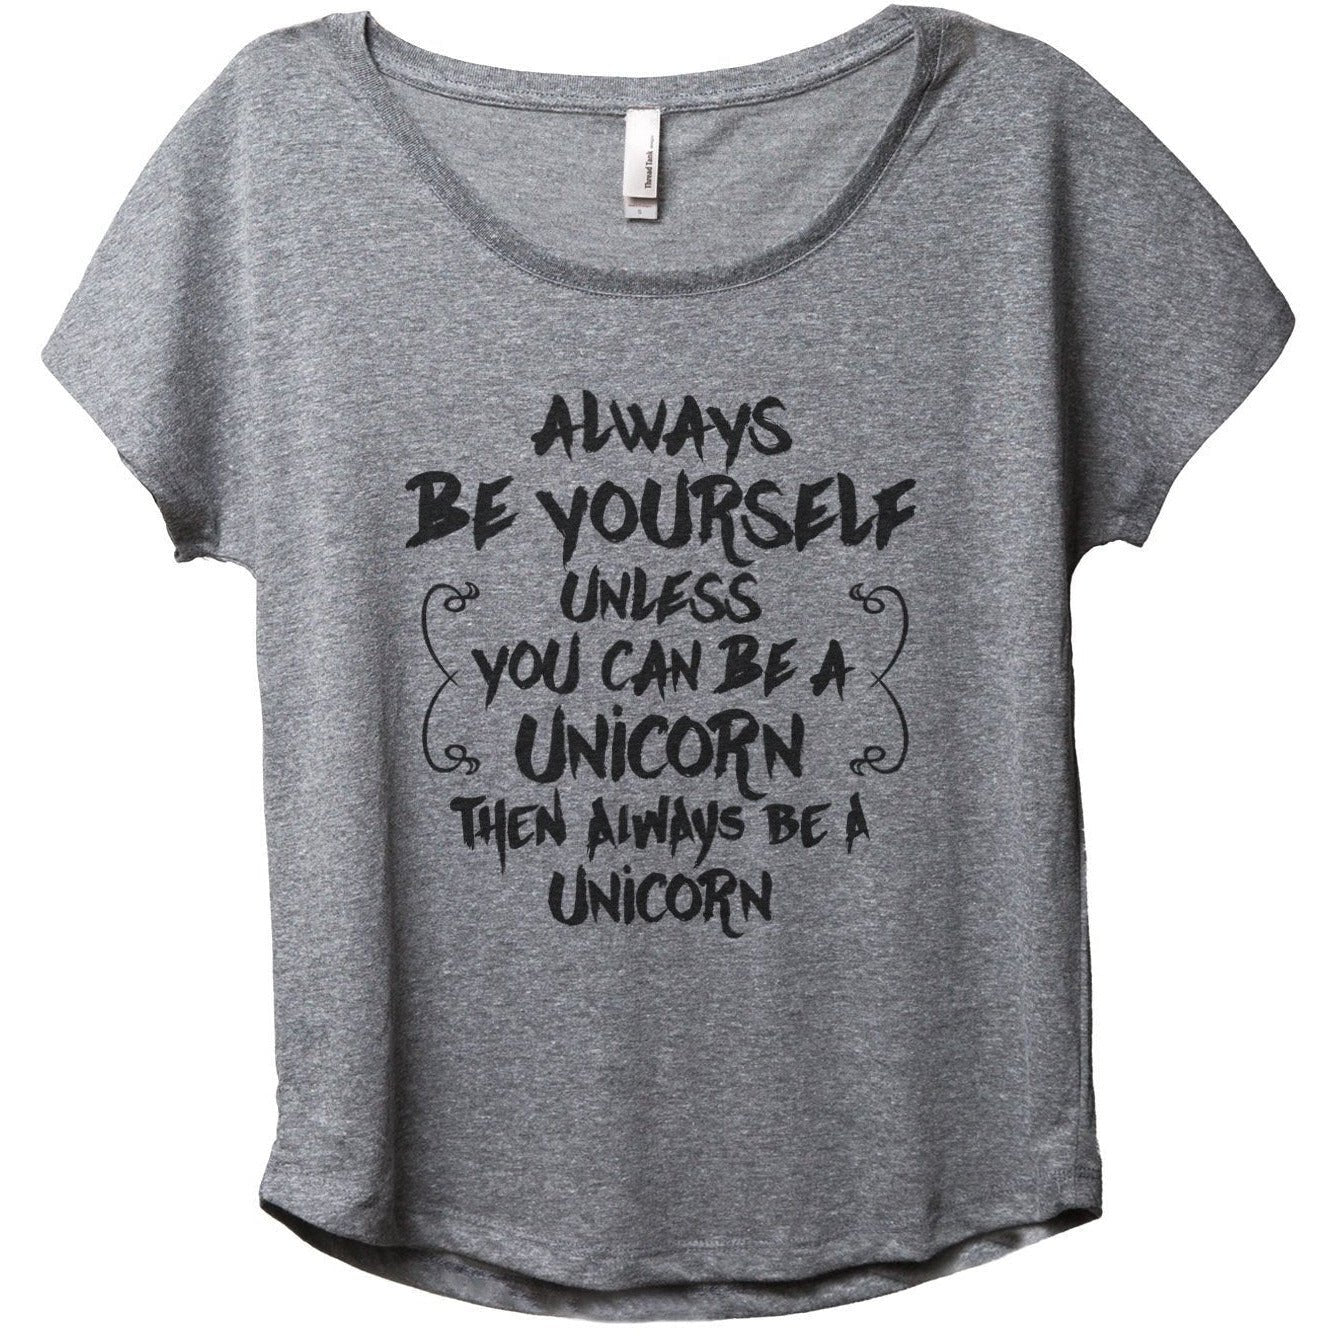 Always Be Yourself, Unicorn - Stories You Can Wear